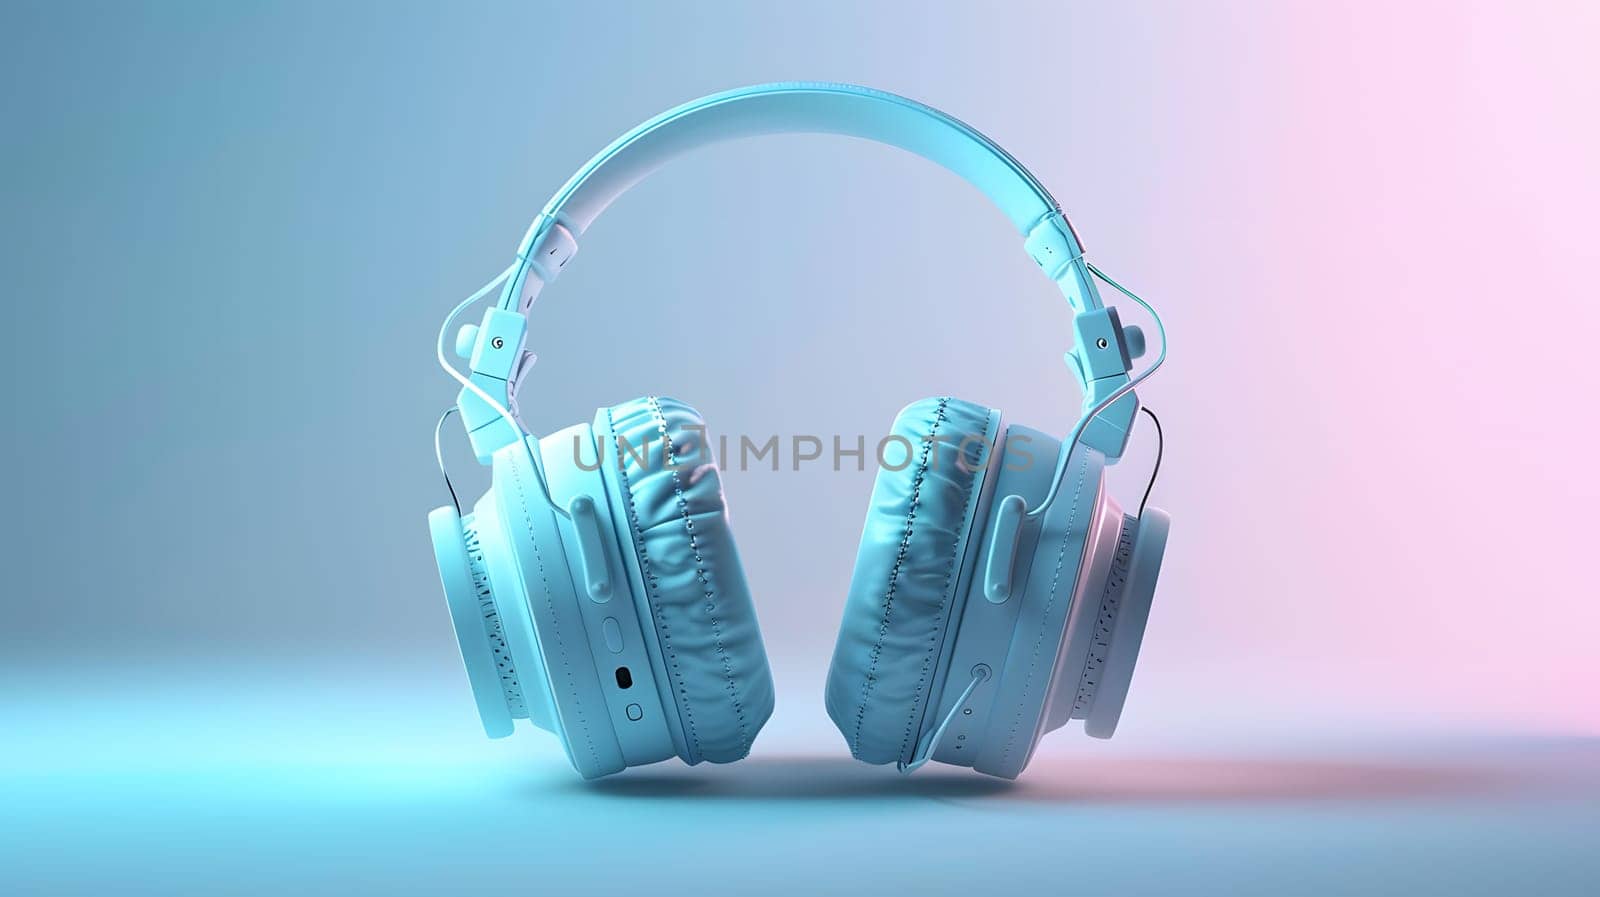 A pair of electric blue headphones, a fashion accessory, on a background of electric blue and magenta. The wire of the headphones is neatly coiled, creating a stylish and trendy image